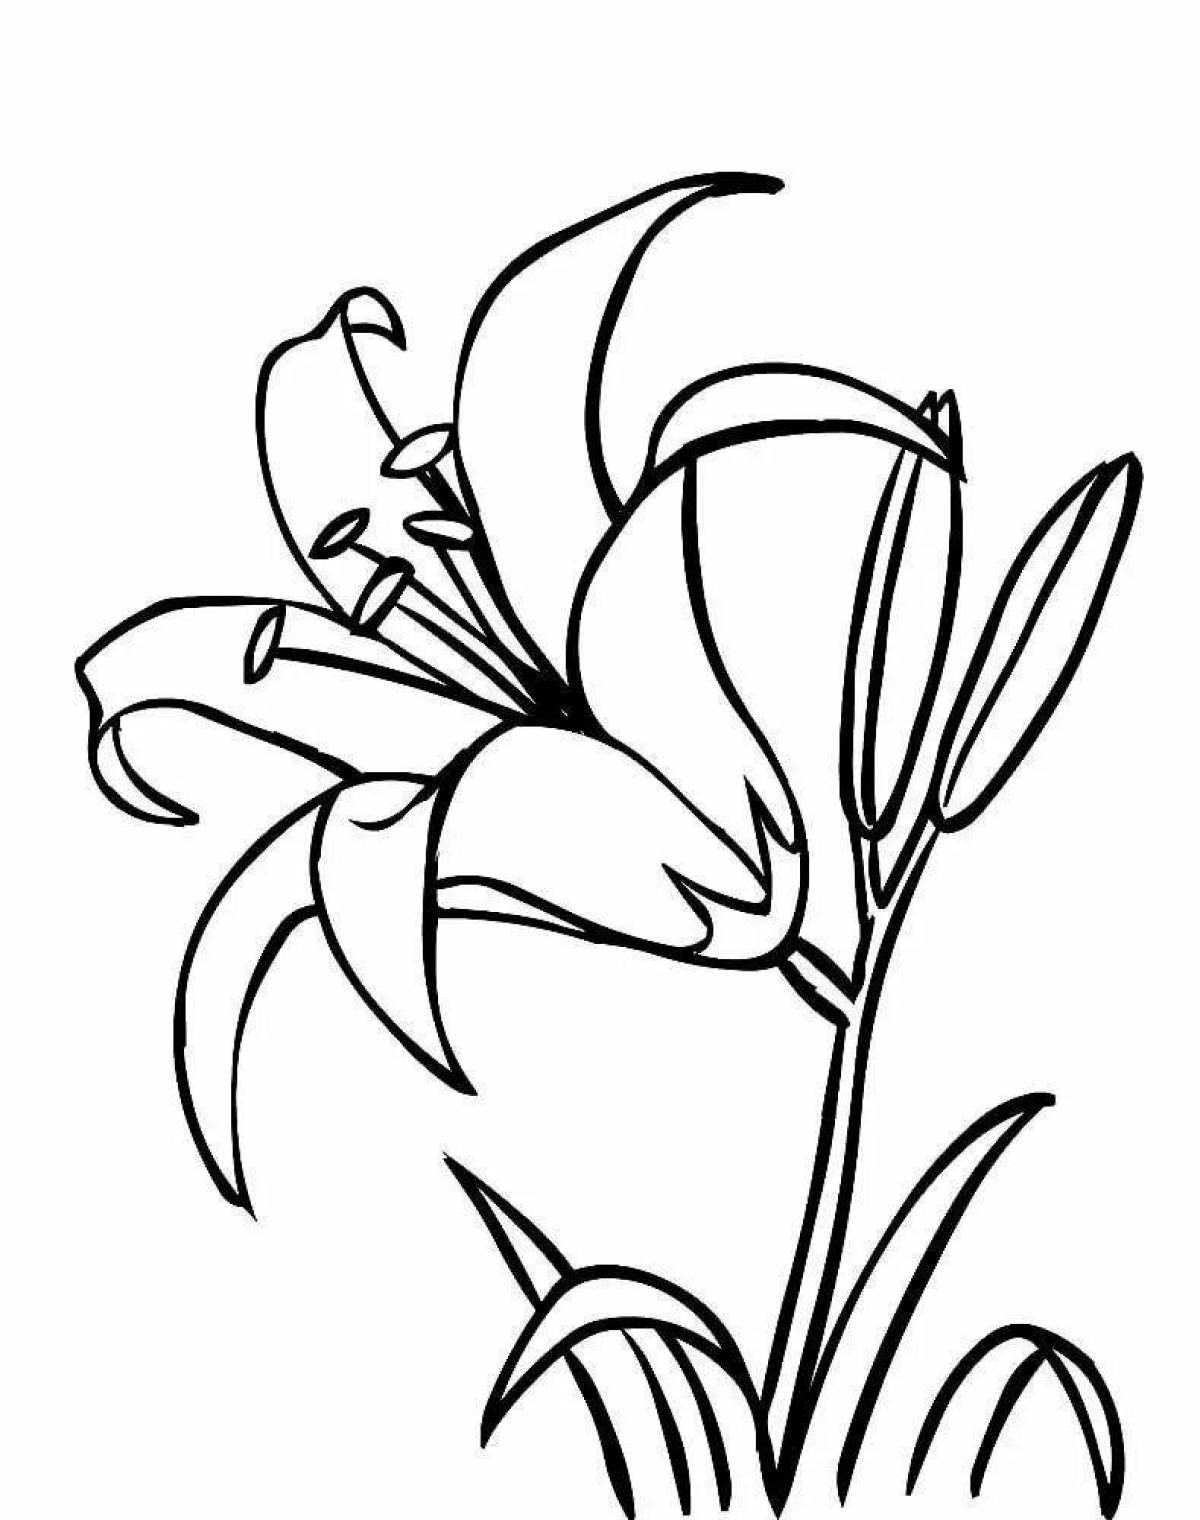 Fun coloring picture of flowers